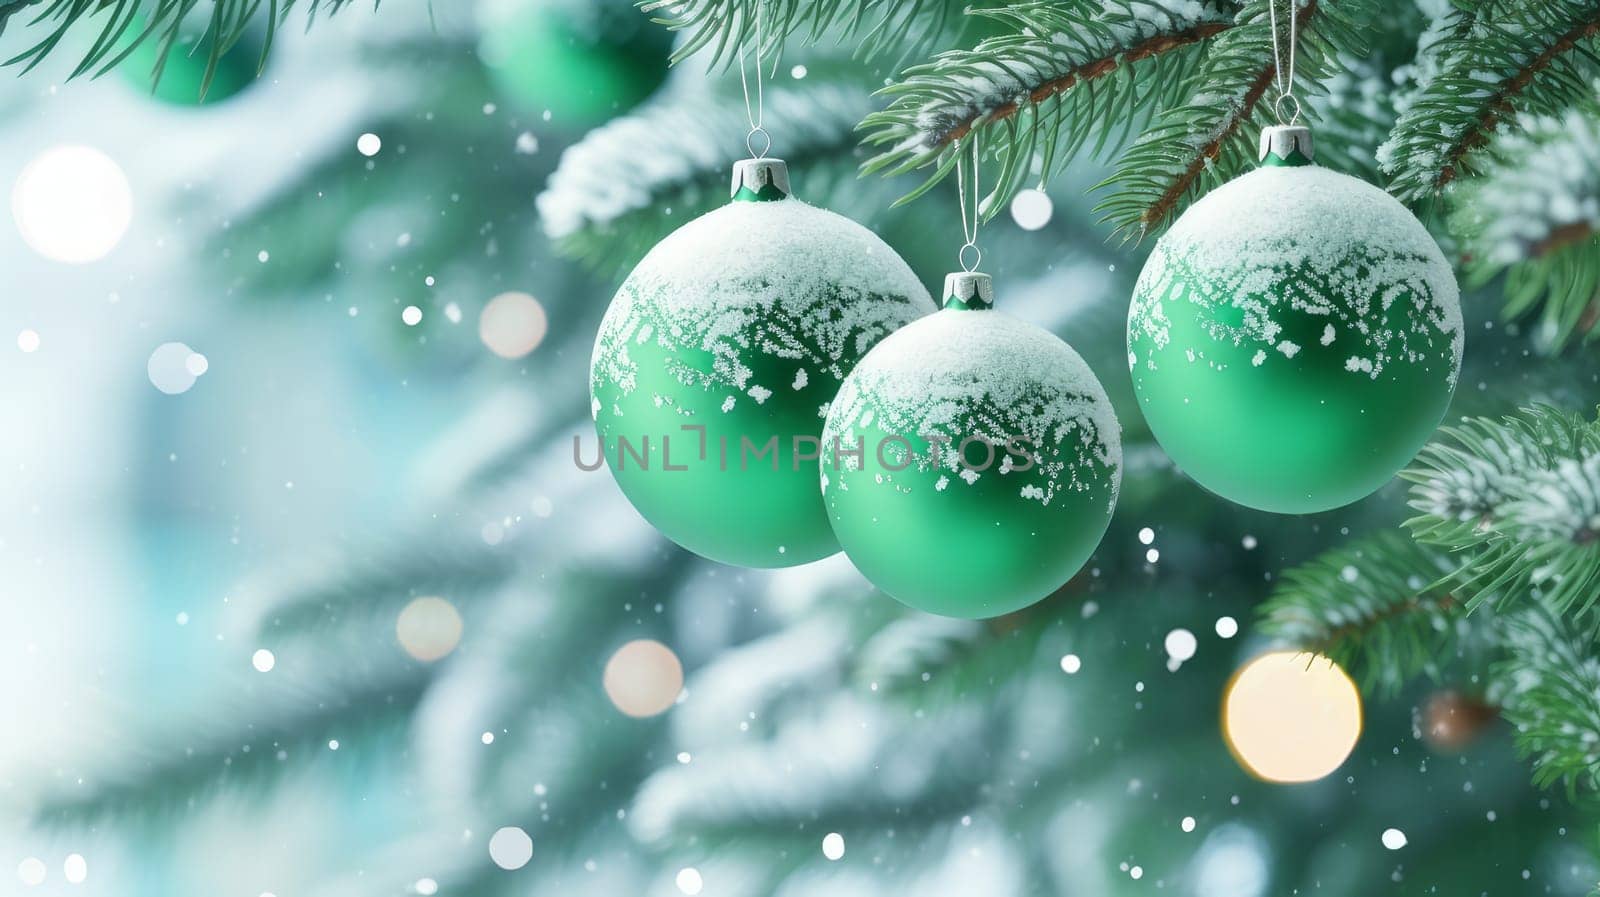 Green balls on fir branches, winter snowy background. festive winter season background, copy space. Merry Christmas and Happy New Year concept